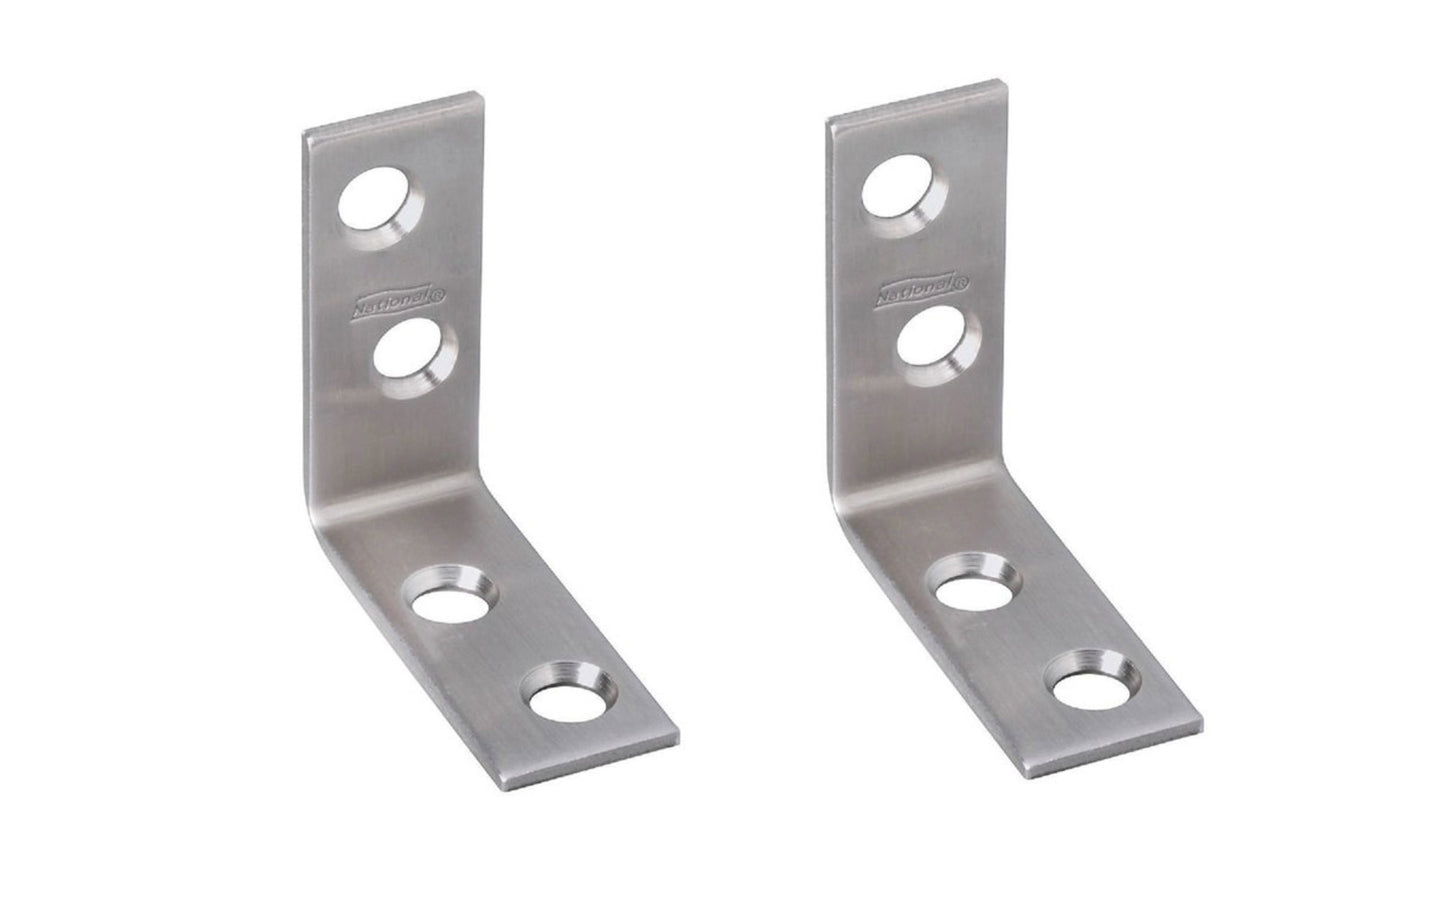 1-1/2" x 5/8" Stainless Corner Brace is designed for furniture, countertops, shelving support, chests, cabinets. For repair of items in workshop, & industrial applications. Stainless steel material for corrosion protection. Sold as pair of corner irons. Includes fasteners. 2 pack. National Hardware Model No. N348-300.